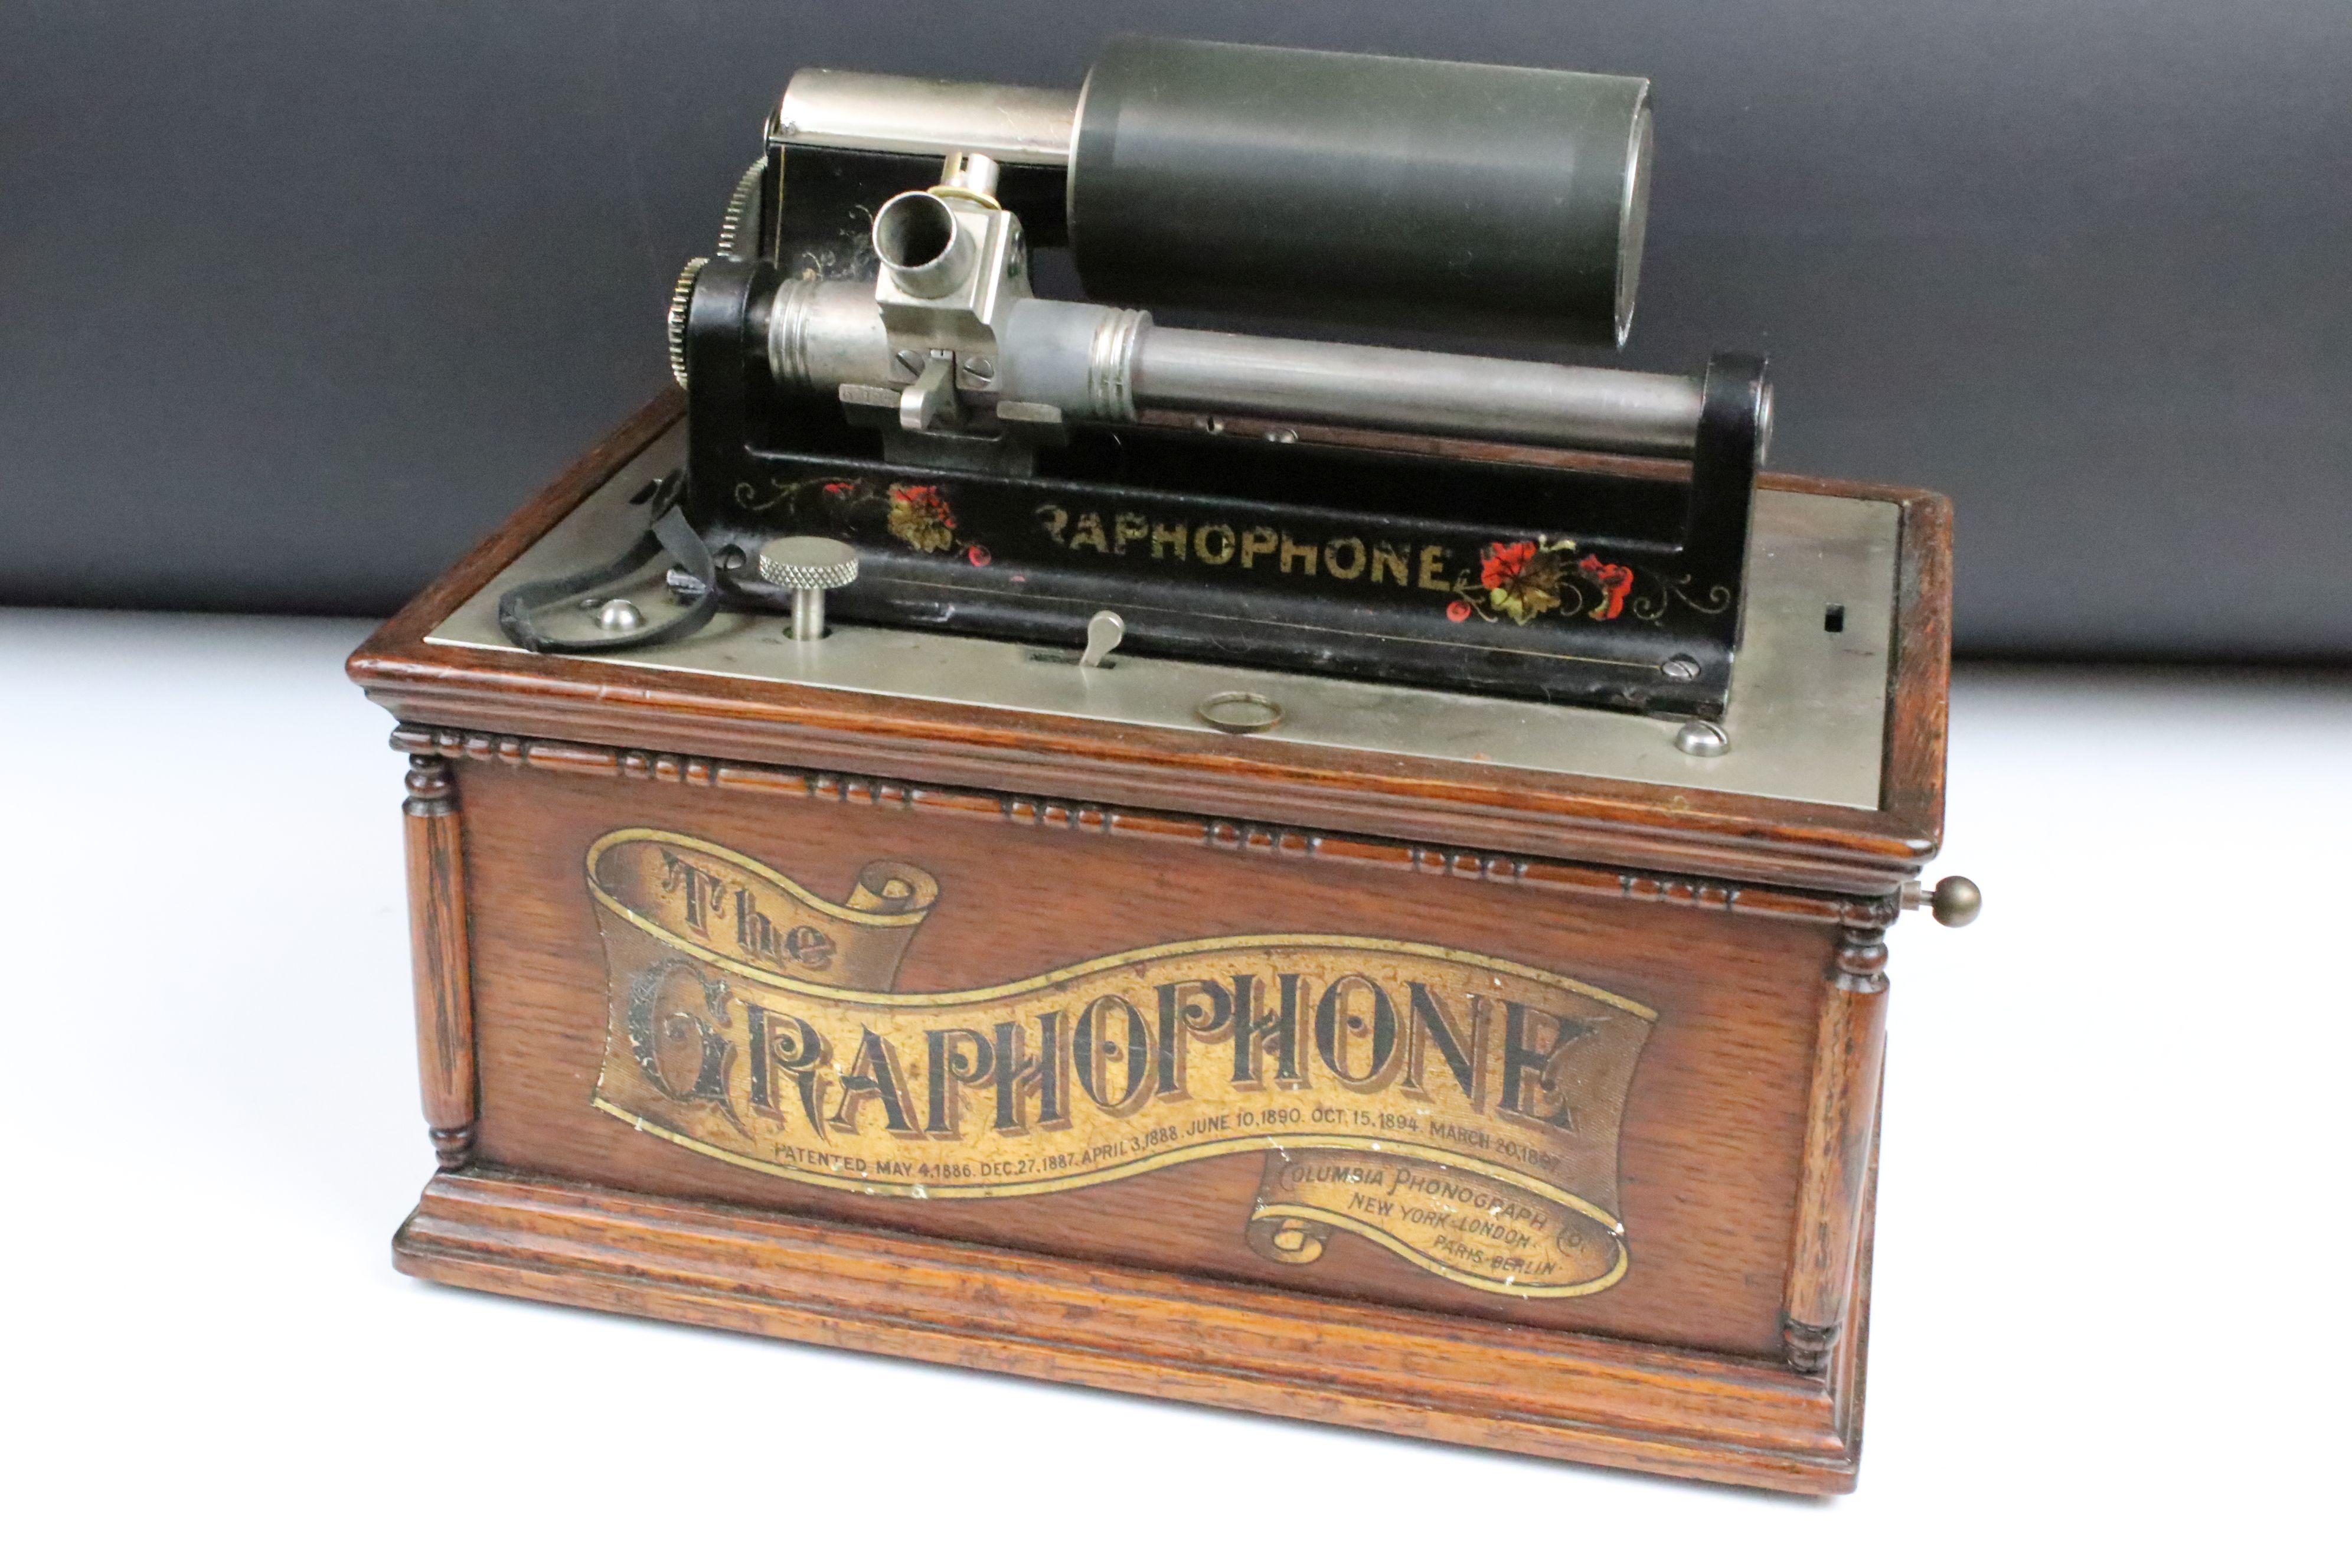 'The Graphophone' early 20th century Columbia Phonograph, Type AT, no. 269135, oak cased, with - Image 2 of 10